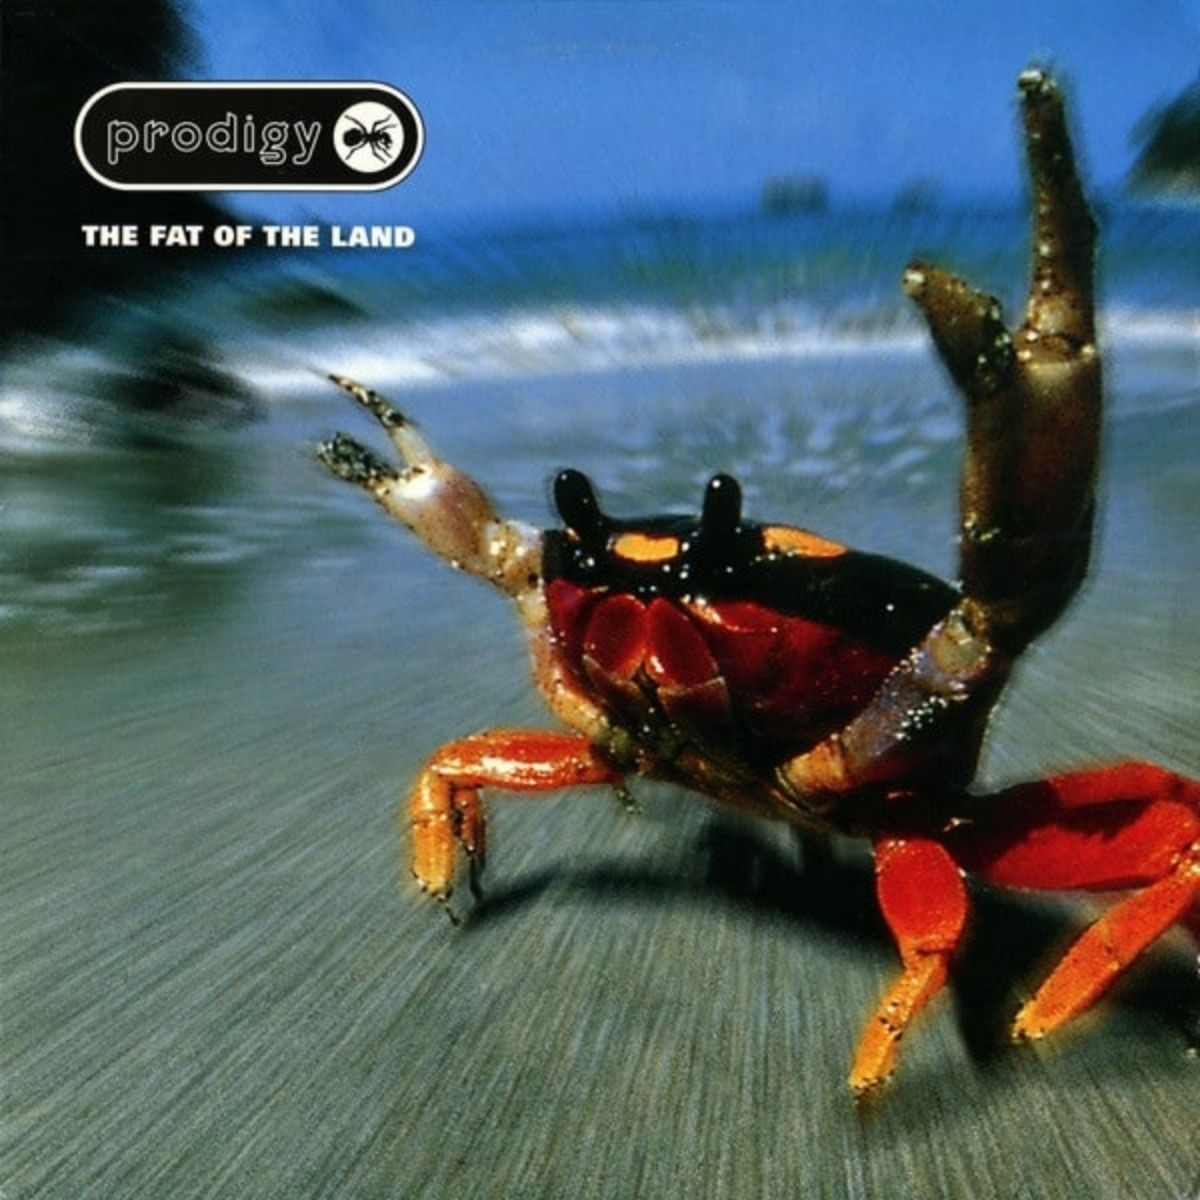 A capa de "The Fat Of The Land" do The Prodigy